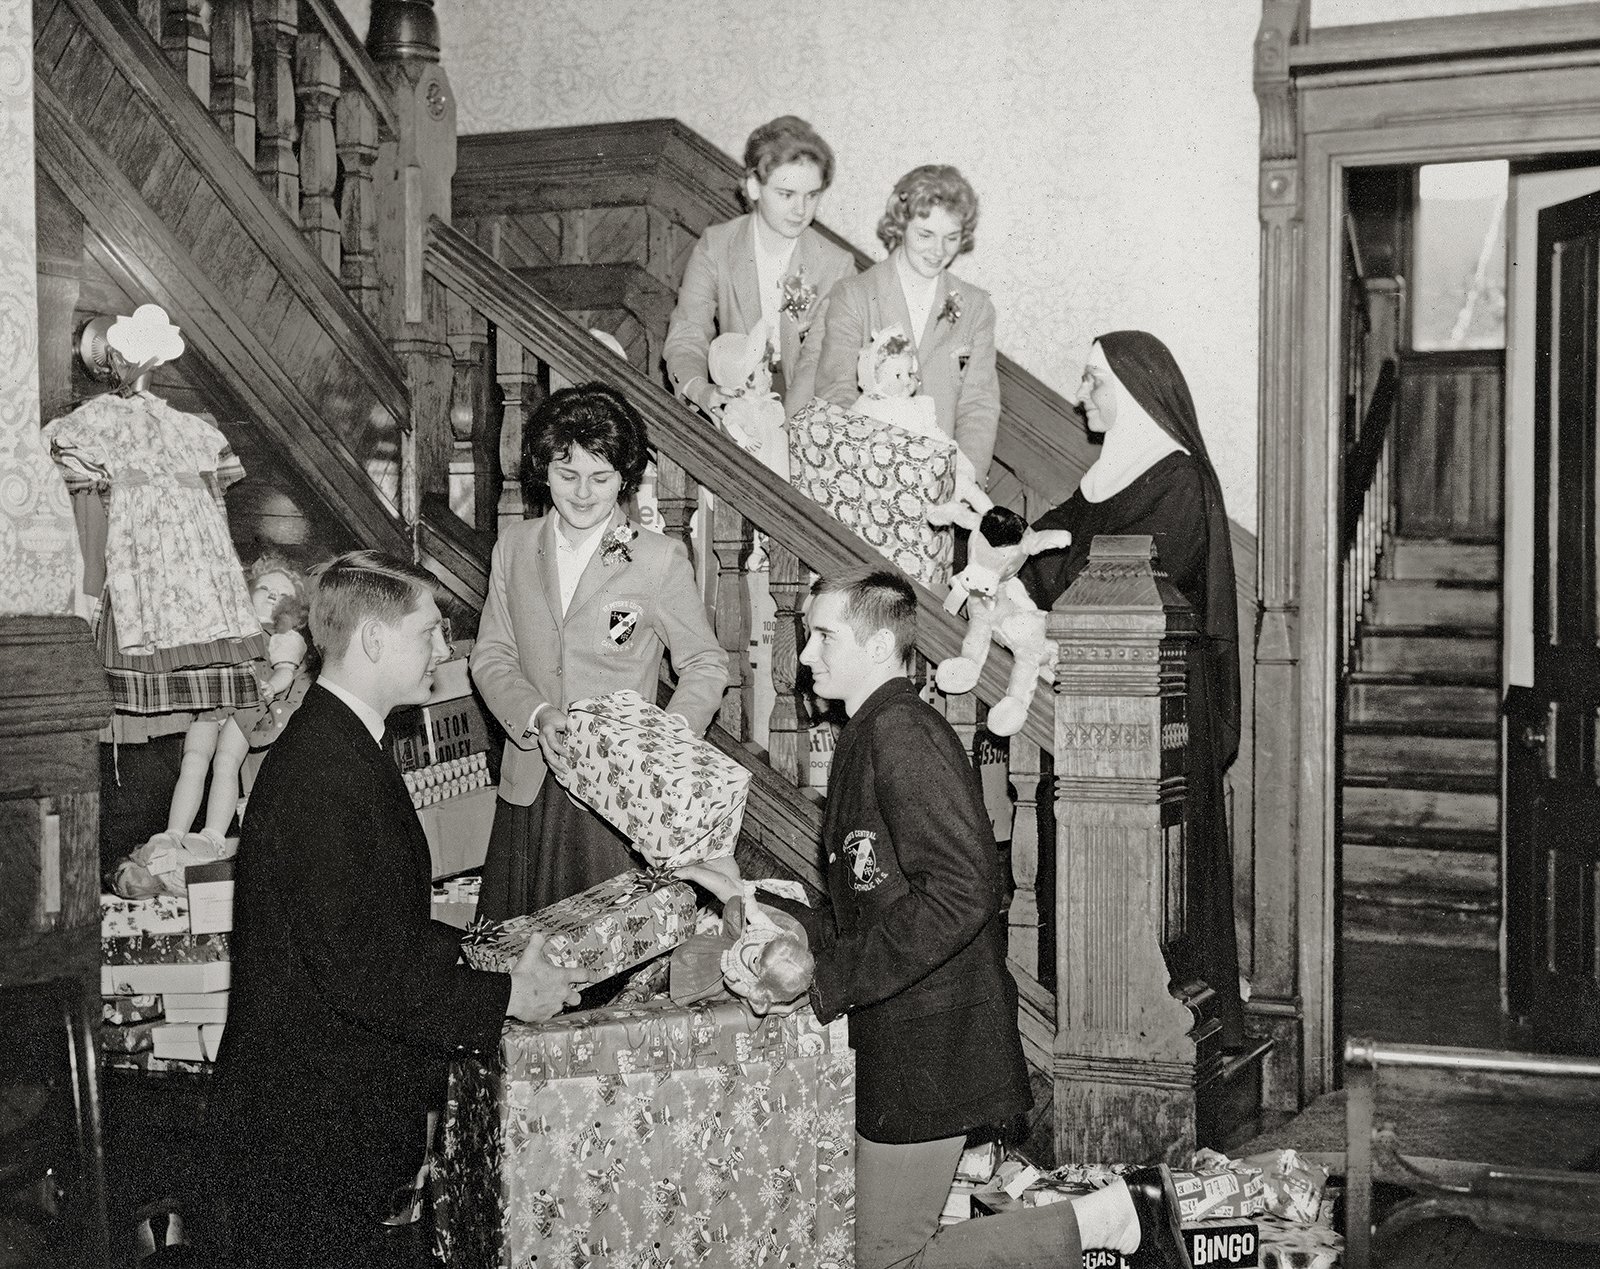 High school class working on a community service project. Moira Kennedy, then a high school senior, is on the stairs in the middle, c. 1962.